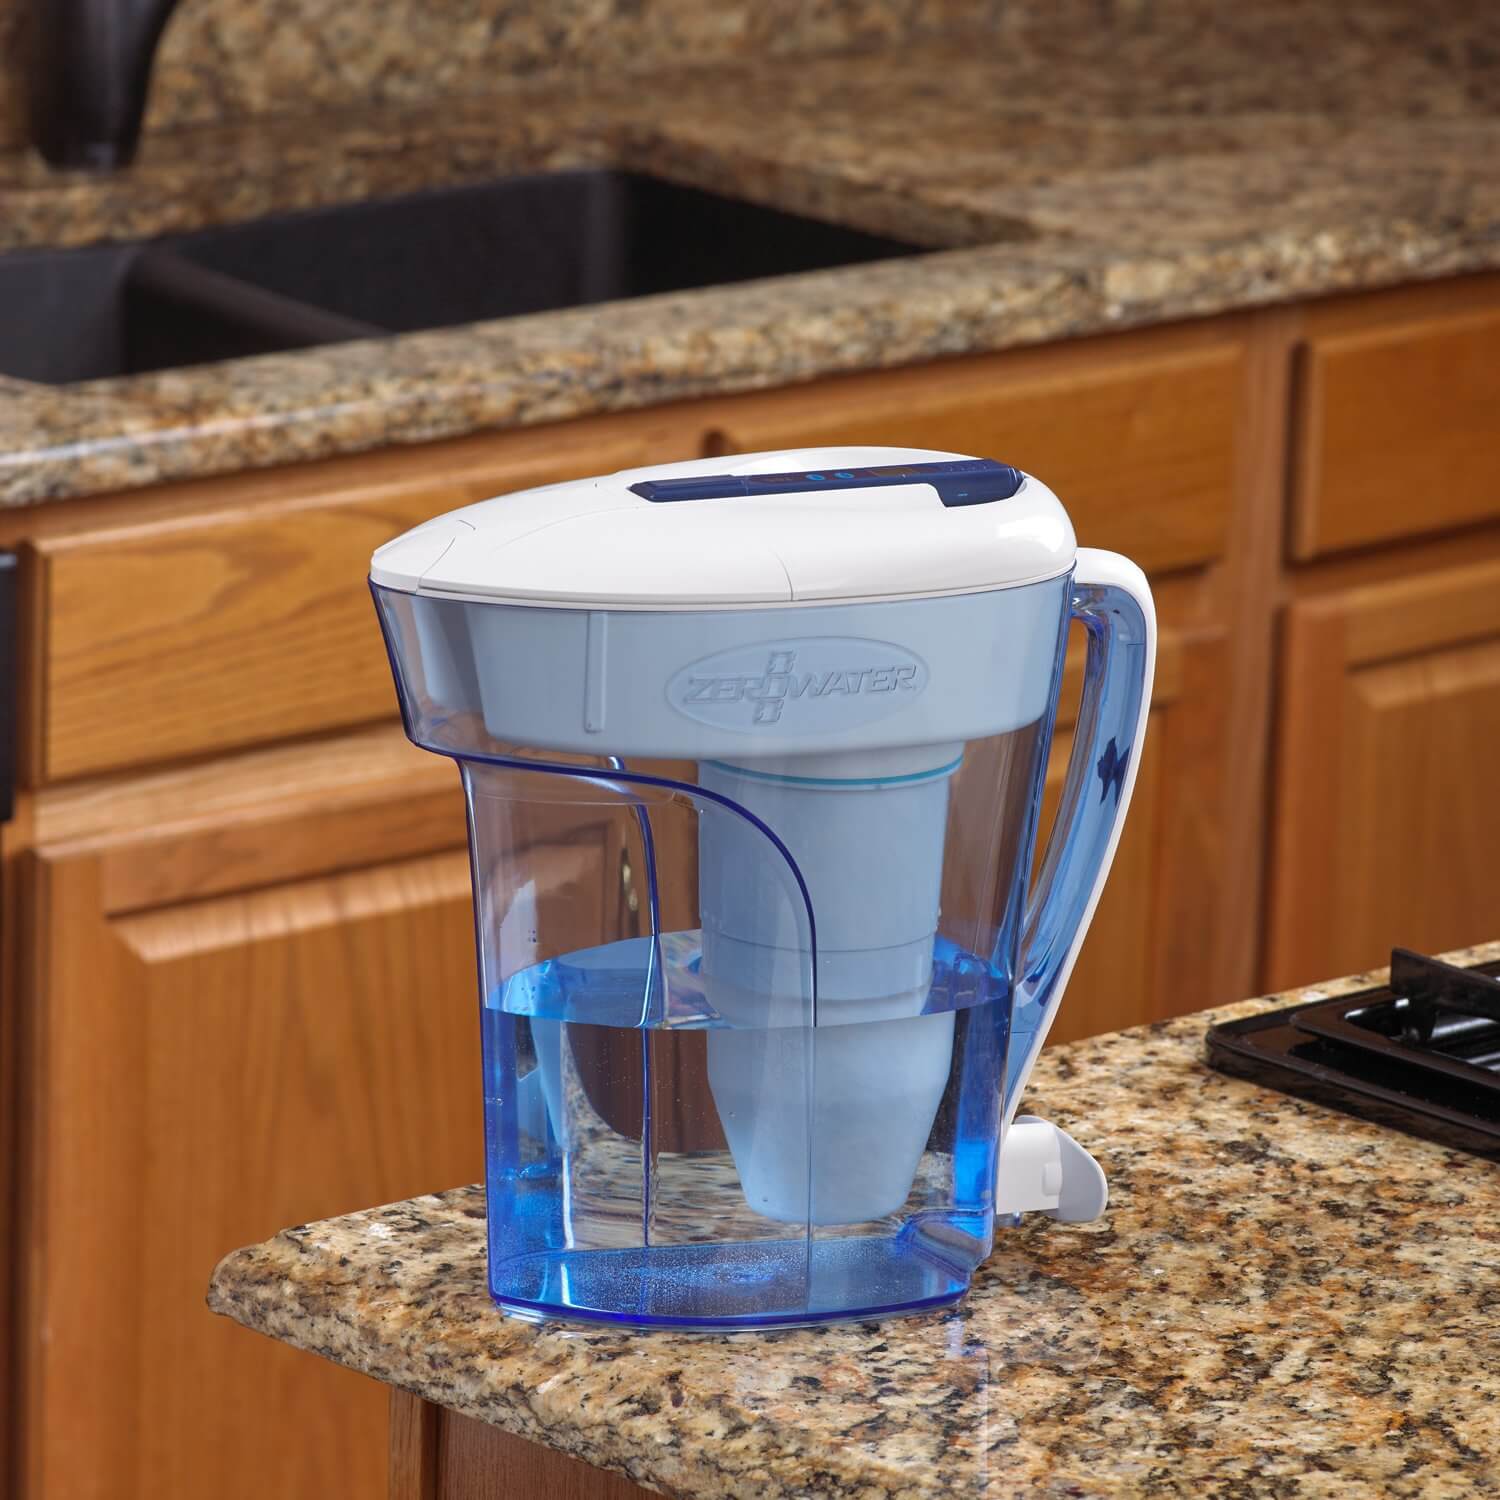 zerowater-12-cup-ready-pour-pitcher-2.jpg